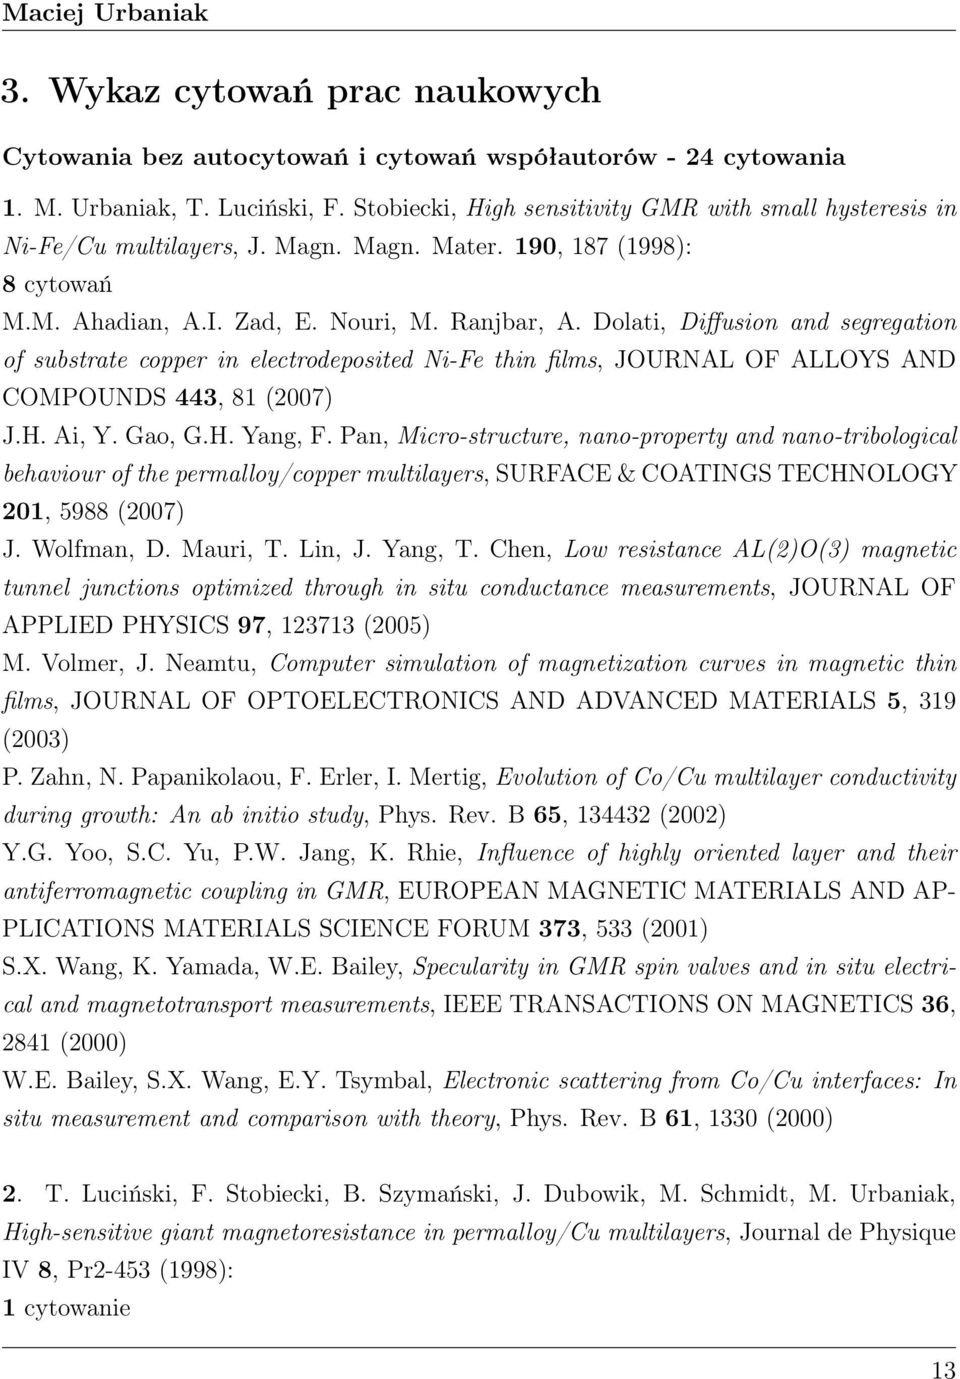 Dolati, Diffusion and segregation of substrate copper in electrodeposited Ni-Fe thin films, JOURNAL OF ALLOYS AND COMPOUNDS 443, 81 (2007) J.H. Ai, Y. Gao, G.H. Yang, F.